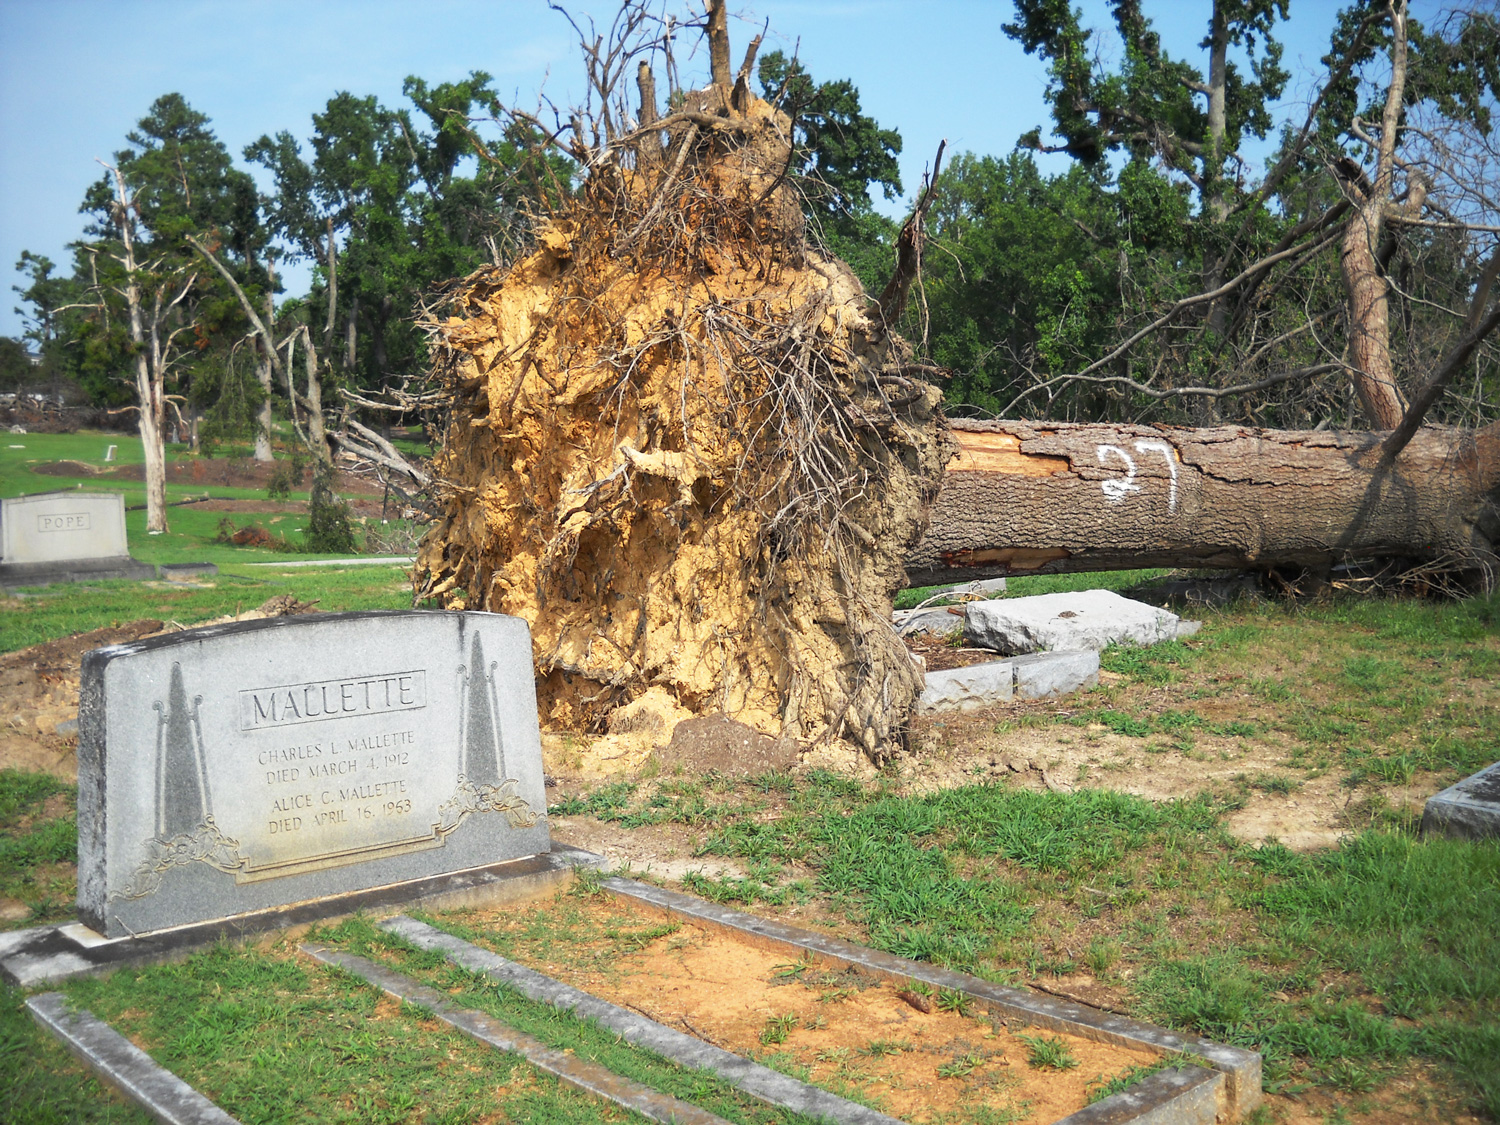 Overview of large, felled tree within cemetery with headstone in foreground.